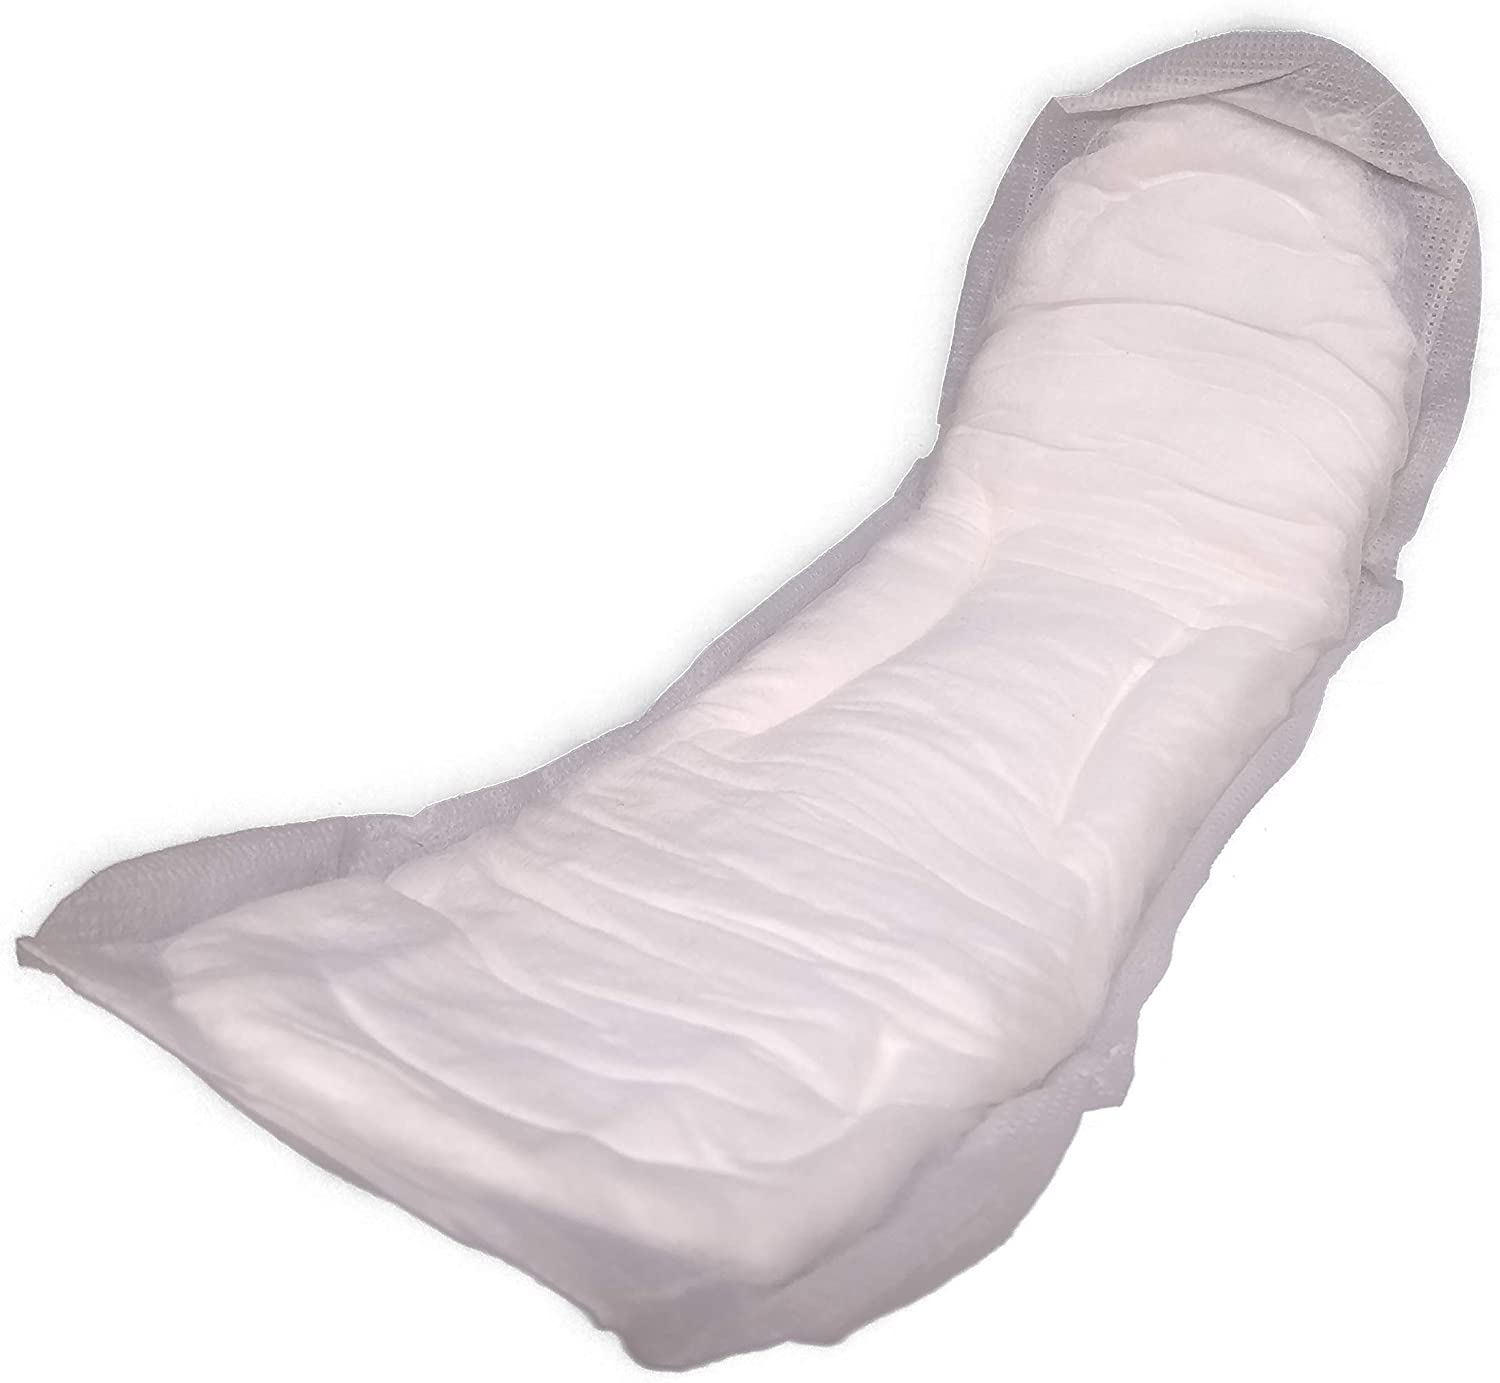 Covidien Curity Maternity Pad 4.33 x 12.25 (Bag of 14 Pads)